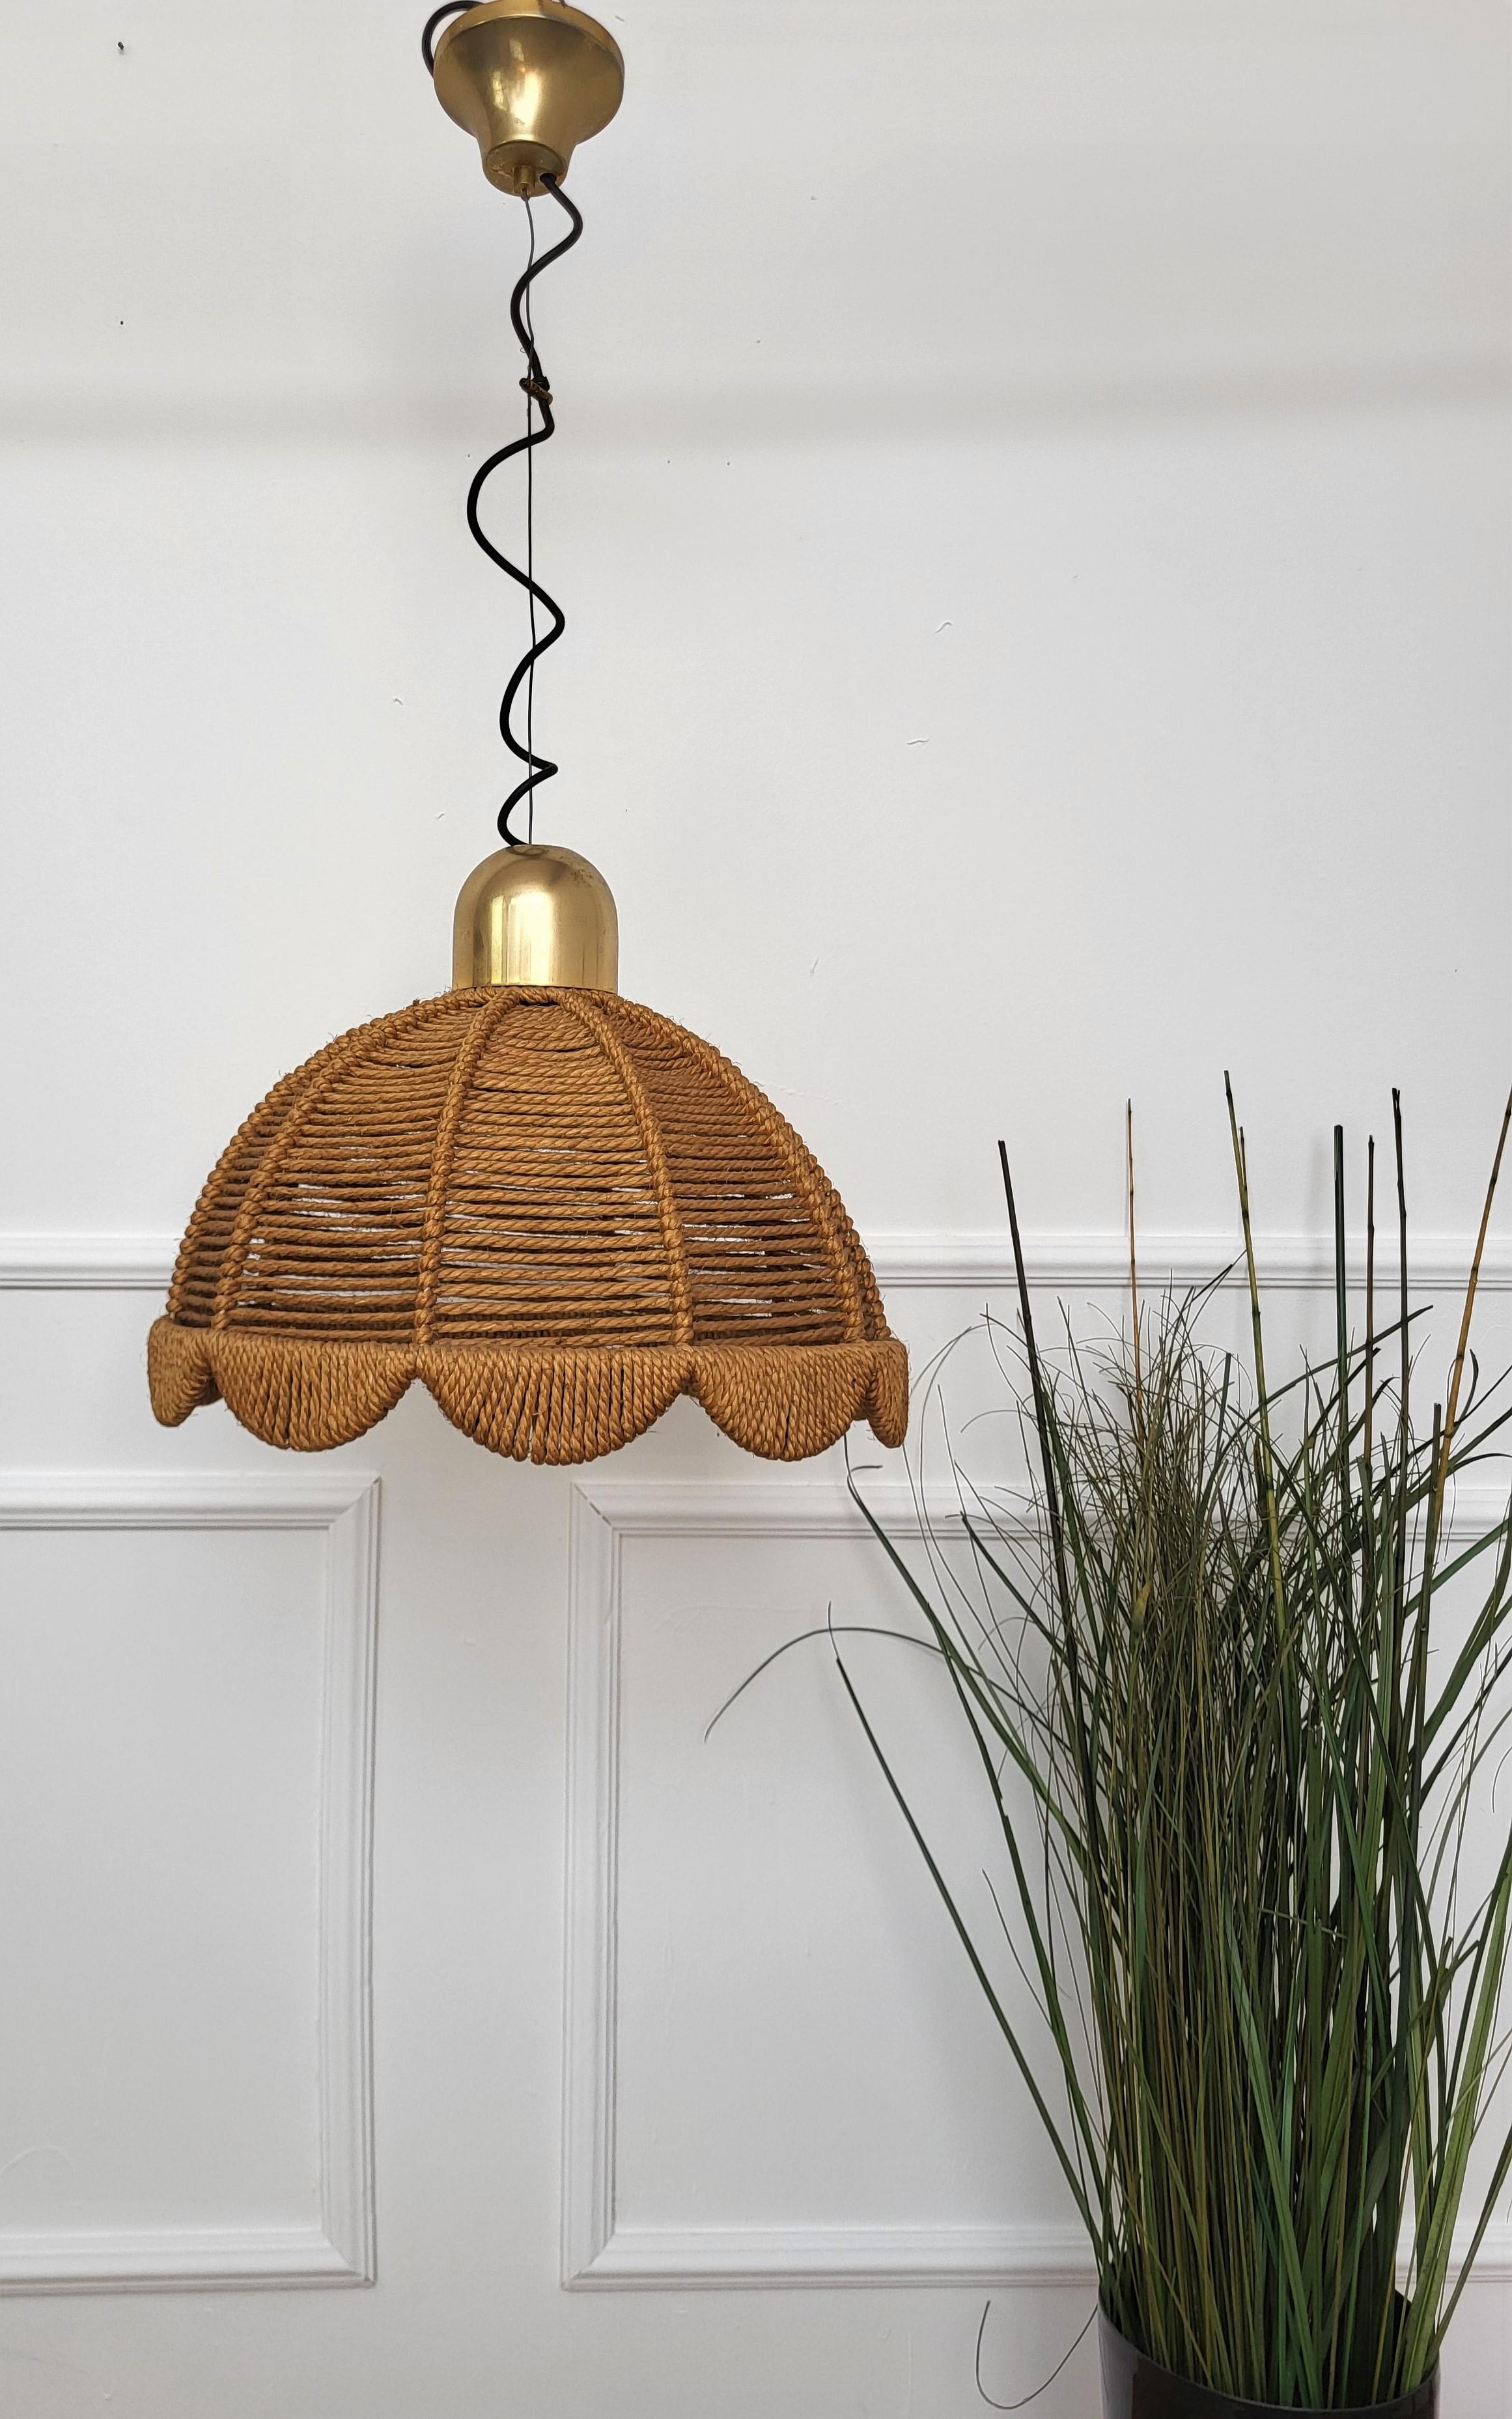 Eye-catching Italian 1960s handcrafted cord woven rope pendant light with circular design. This suspension lamp has a bell shaped lampshade hanging from a gilt brass chain topped and ended by a very nice brass bun. The length of the chain can be